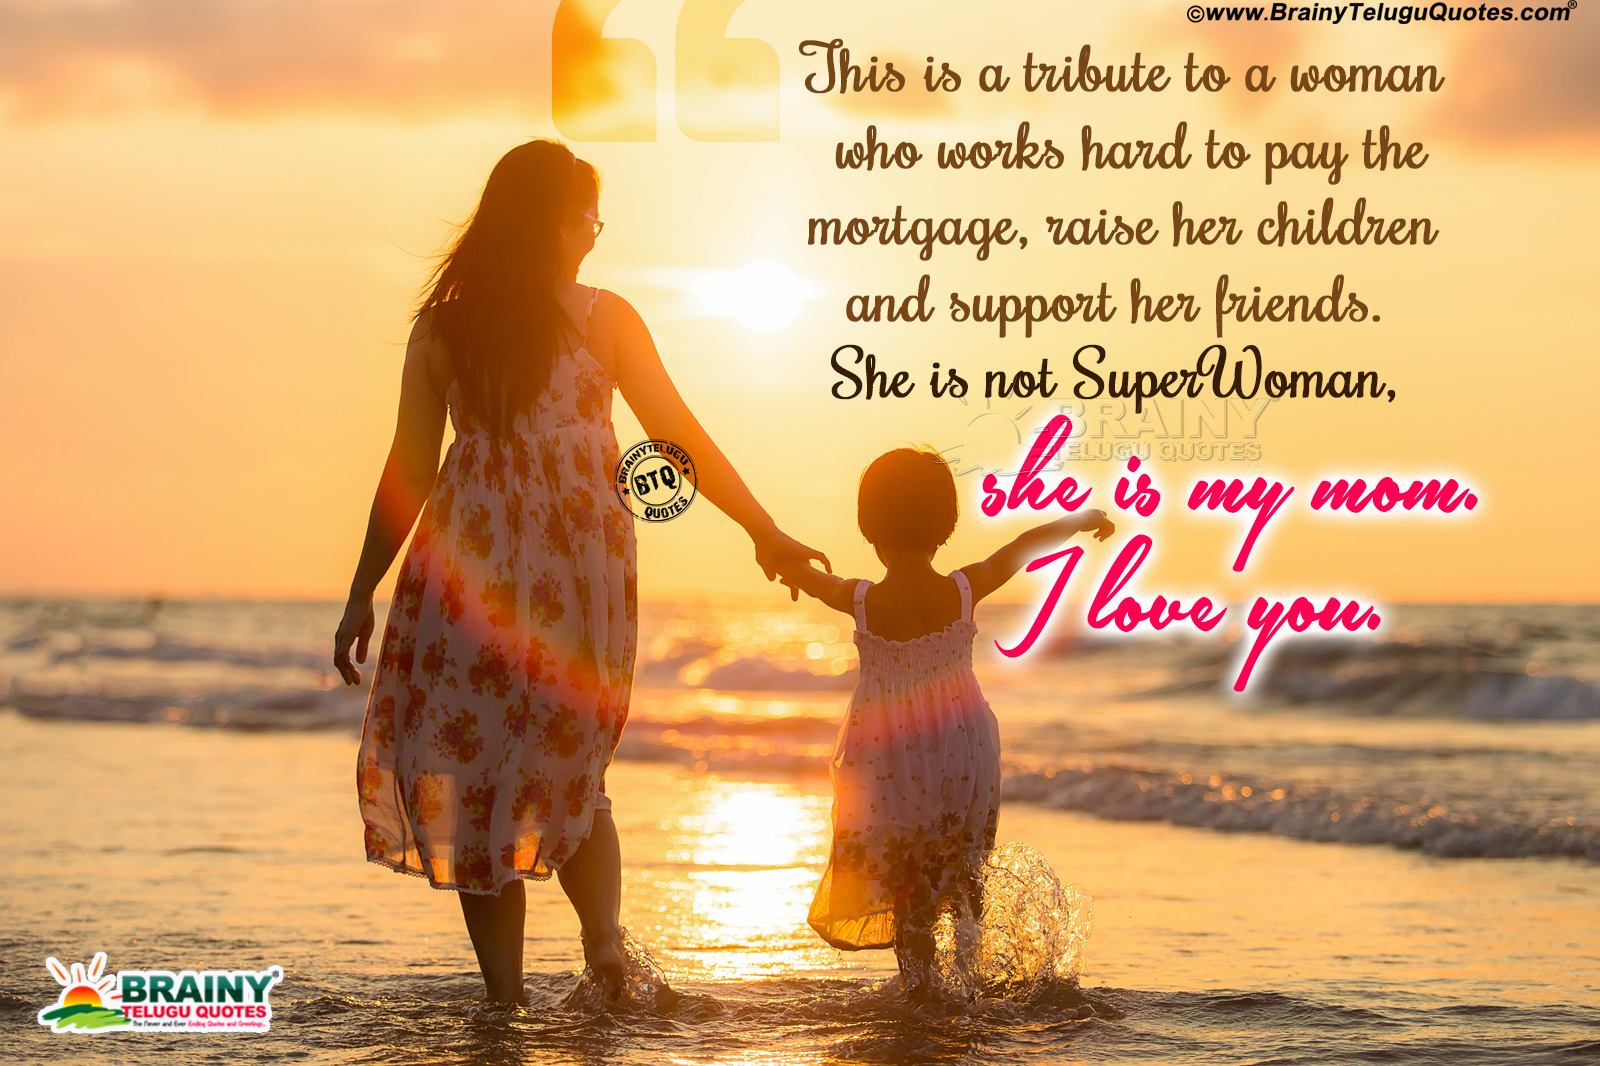 Inspirational Mother Love Quotations In English Brainyteluguquotes Comtelugu Quotes English Quotes Hindi Quotes Tamil Quotes Greetings